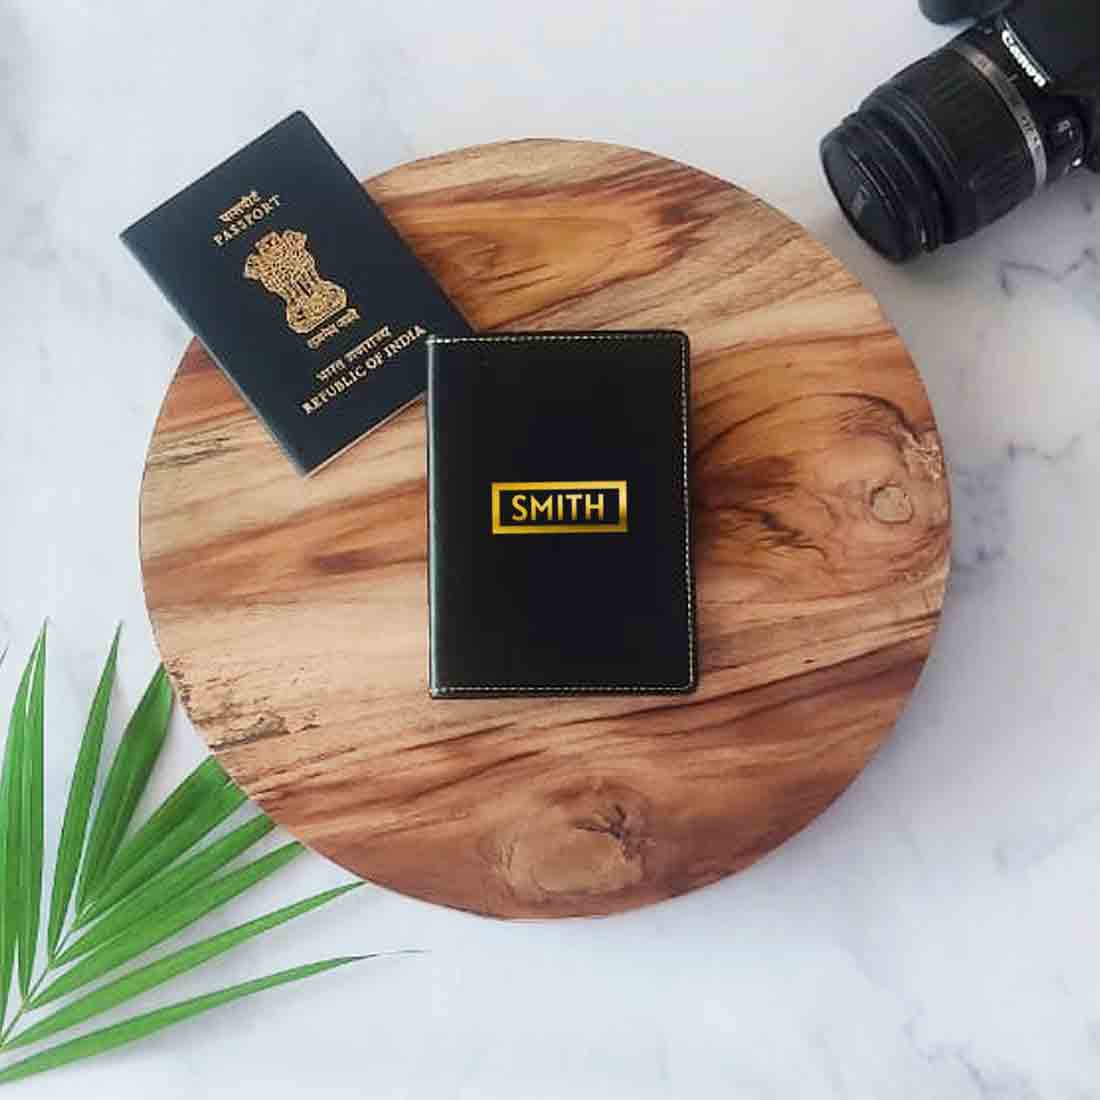 Personalized Gifts for Brother Raksha Bandhan Gift Set with Black PU Box, Custom Coffee Tumber, Personalized Pen, Passport Cover and Chocolates